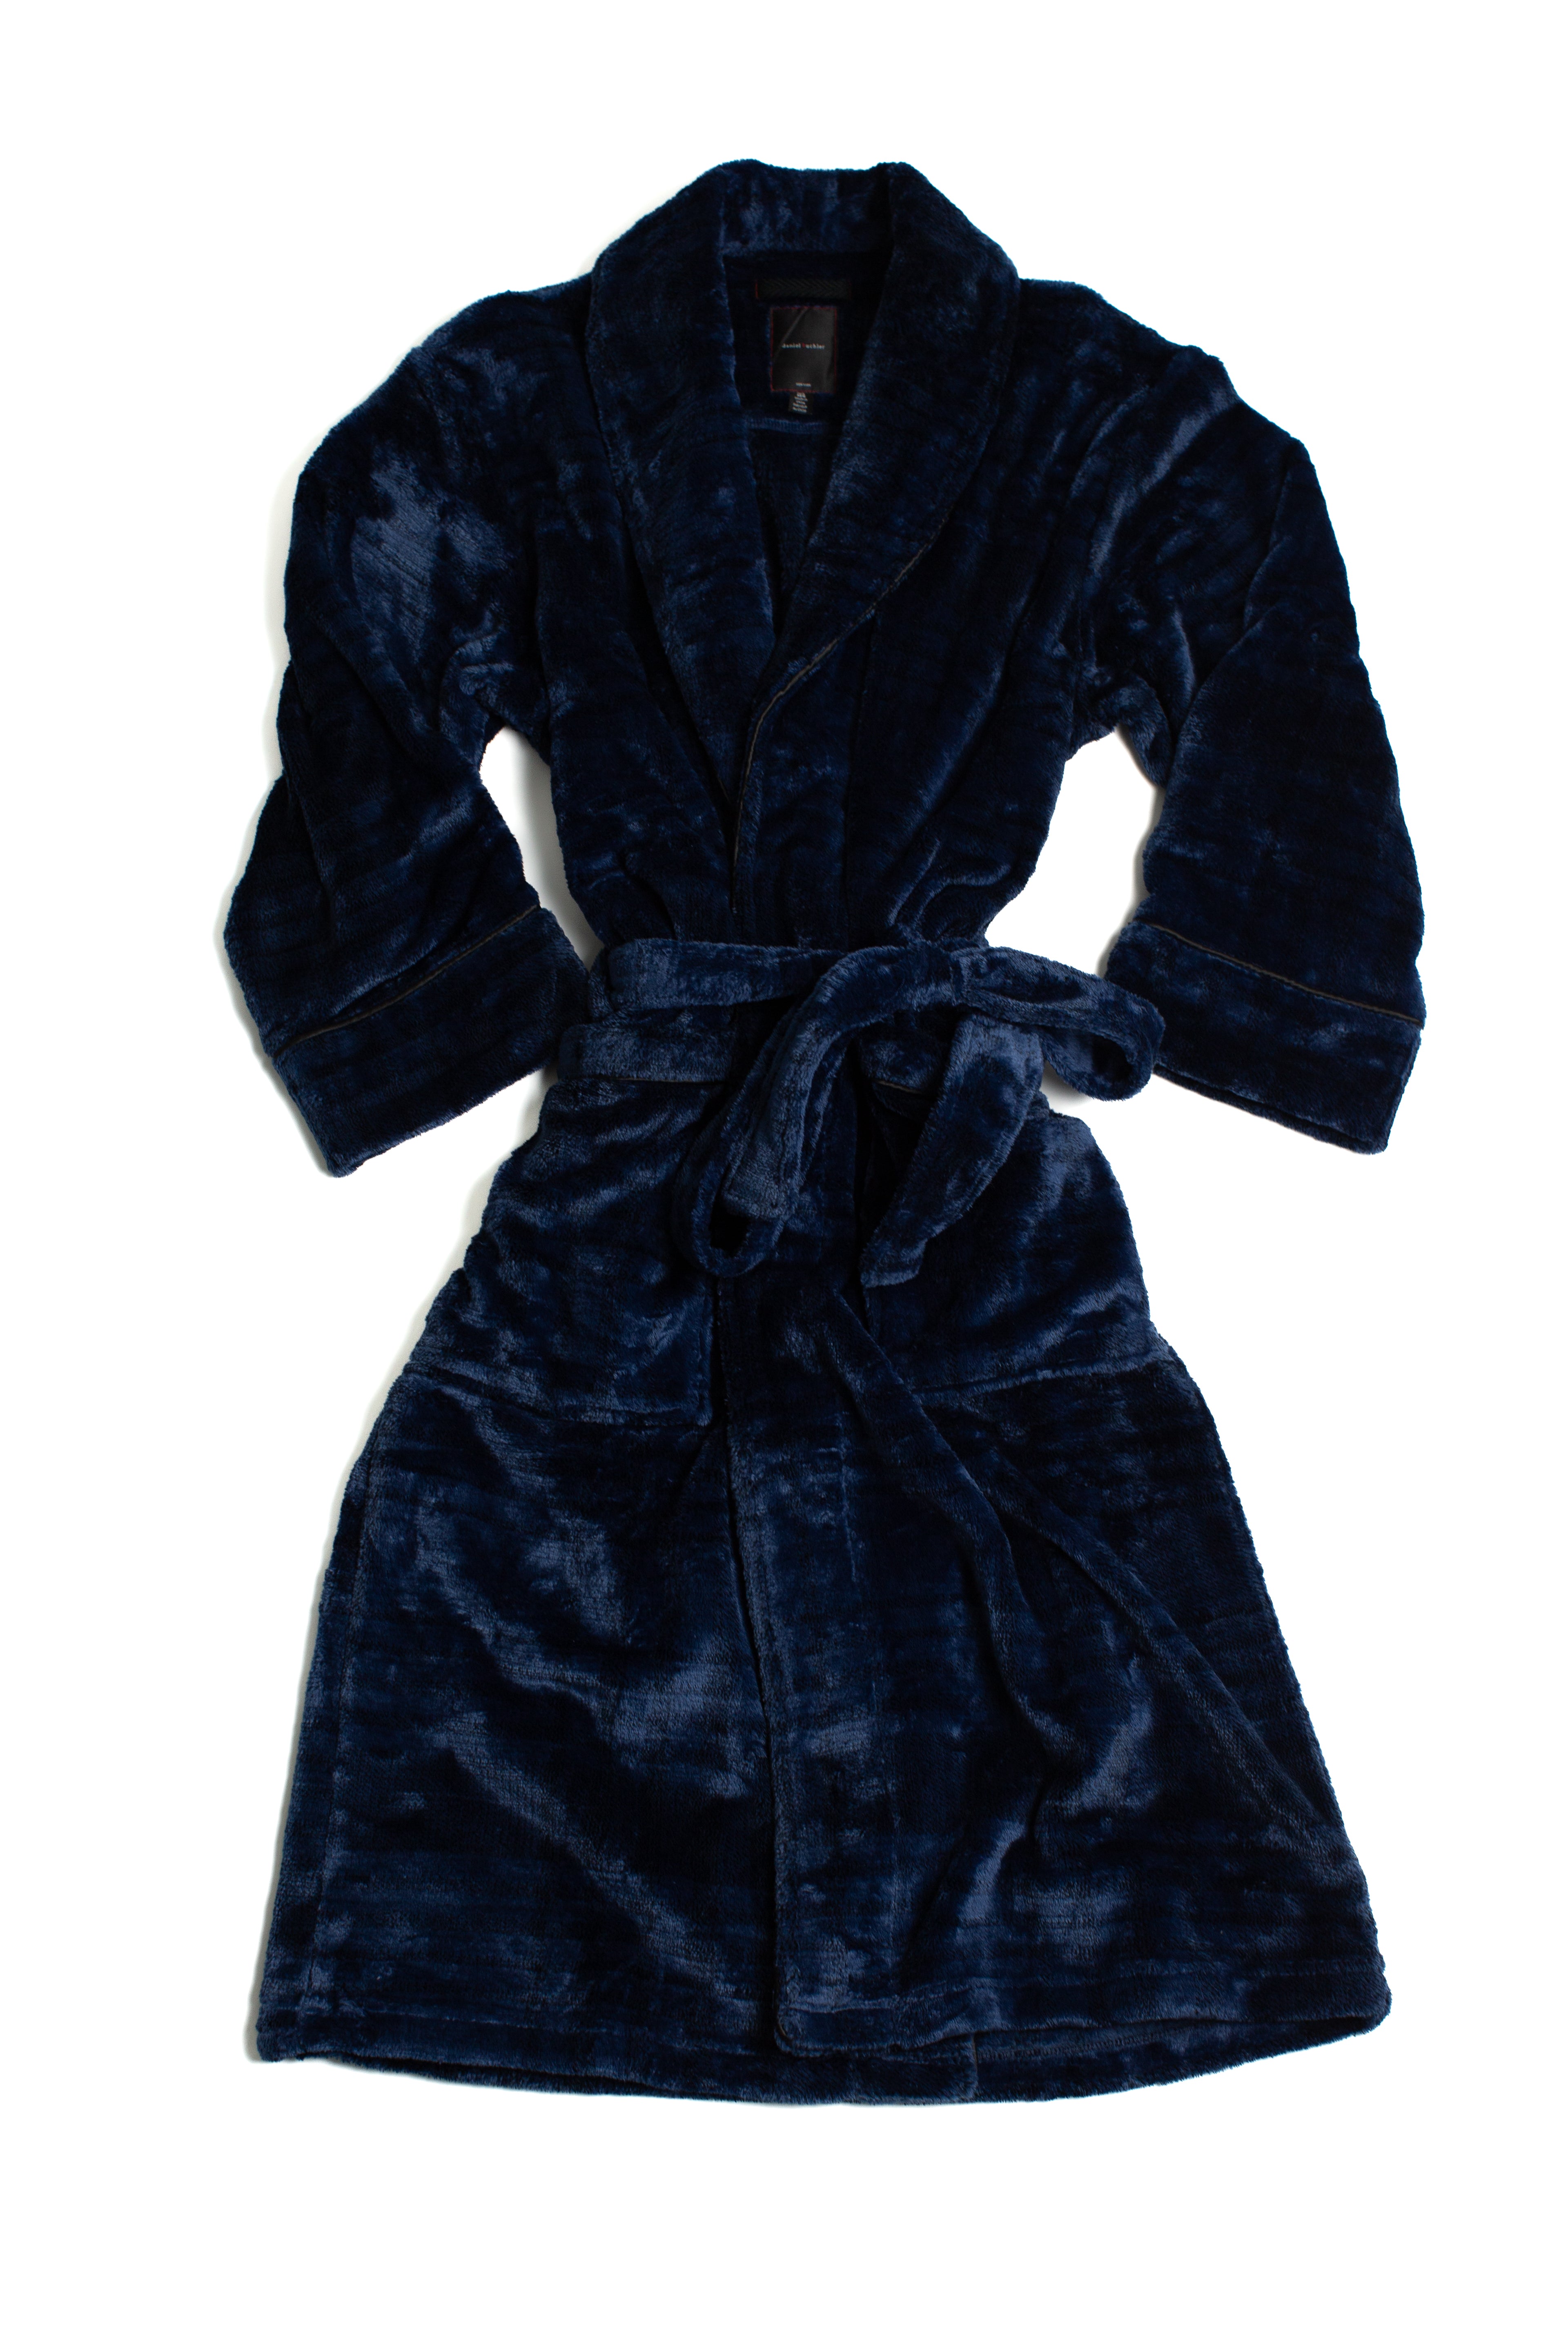 Heather Square Robe in Navy